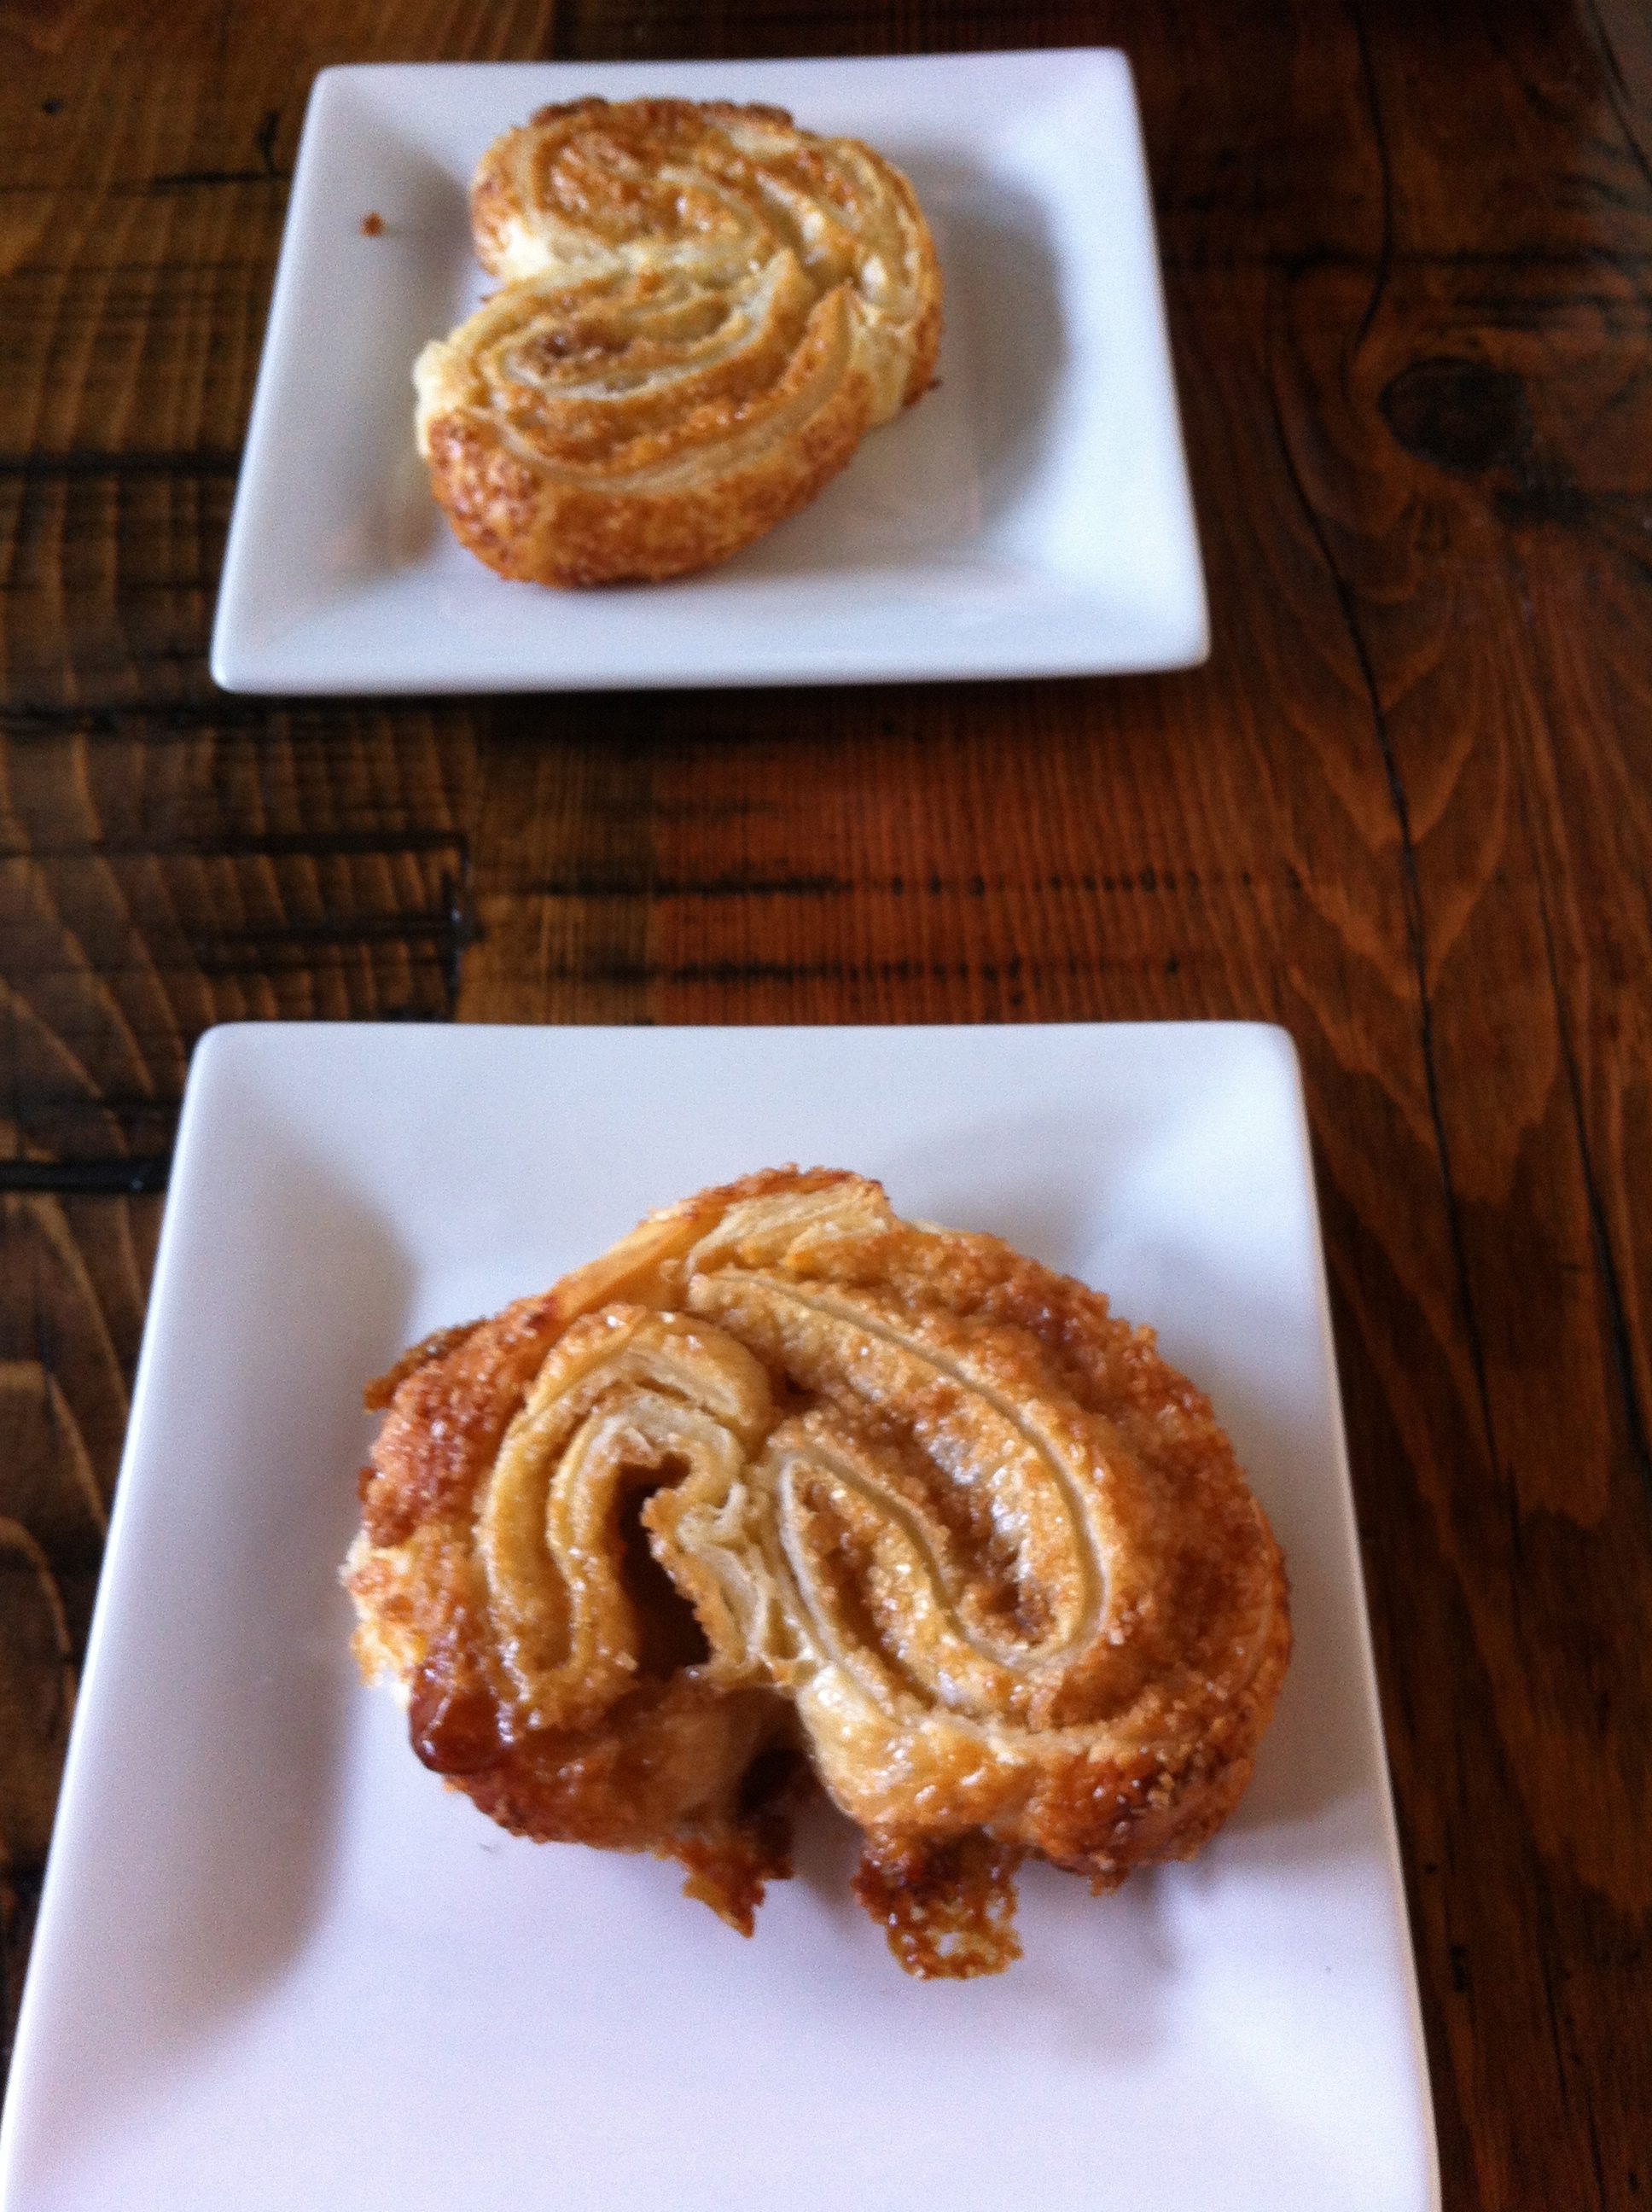 Palmiers from the Trokay Cafe